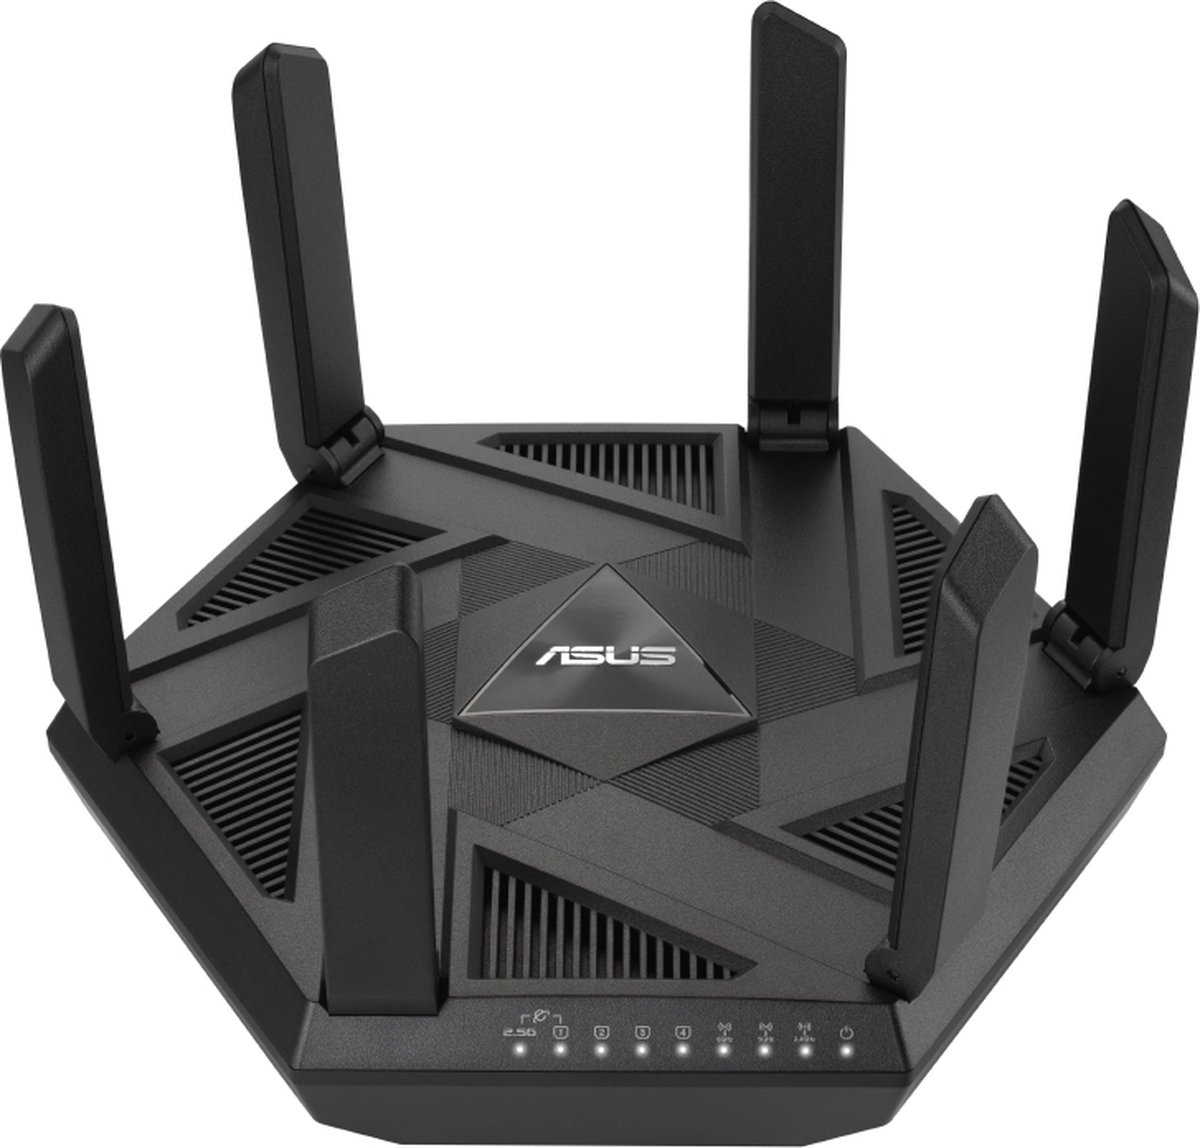 ASUS RT-AXE7800 - Gaming Router - Tri-band - WiFi 6E - 7800 Mbps - Zwart |  bol.com